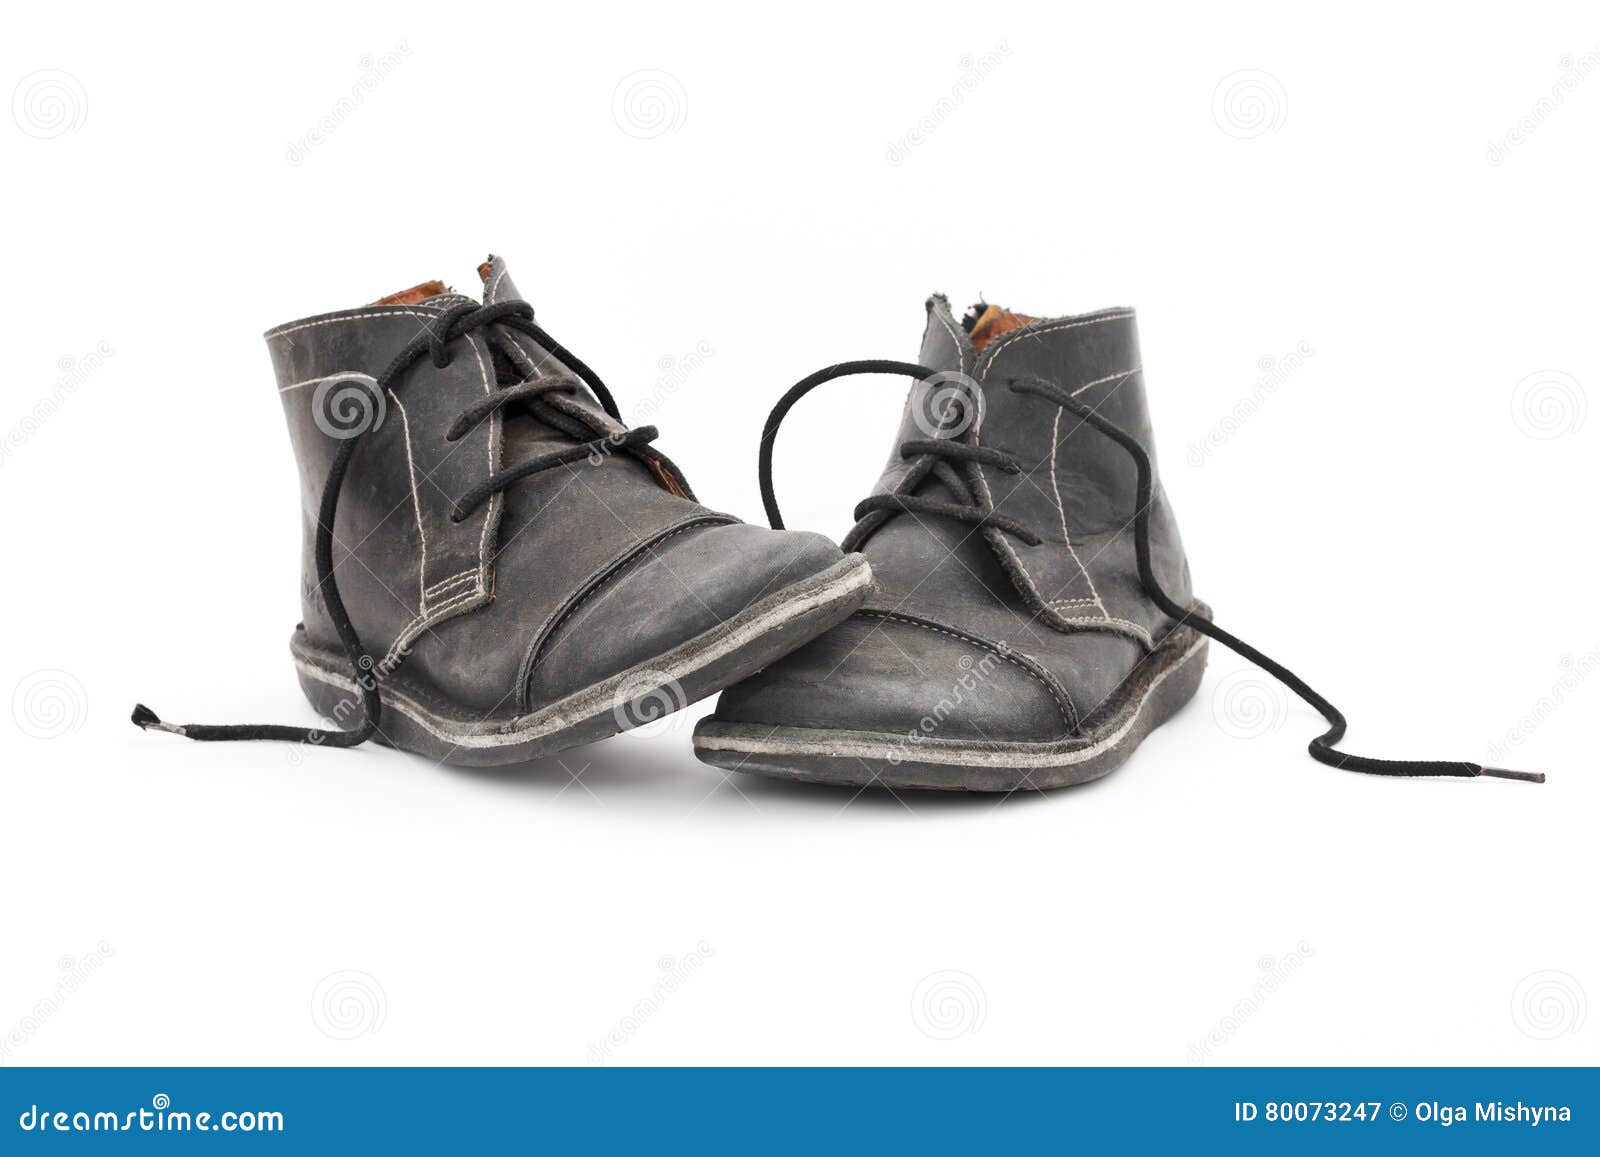 Old Black Male Shoes Isolated on White Stock Image - Image of leather ...